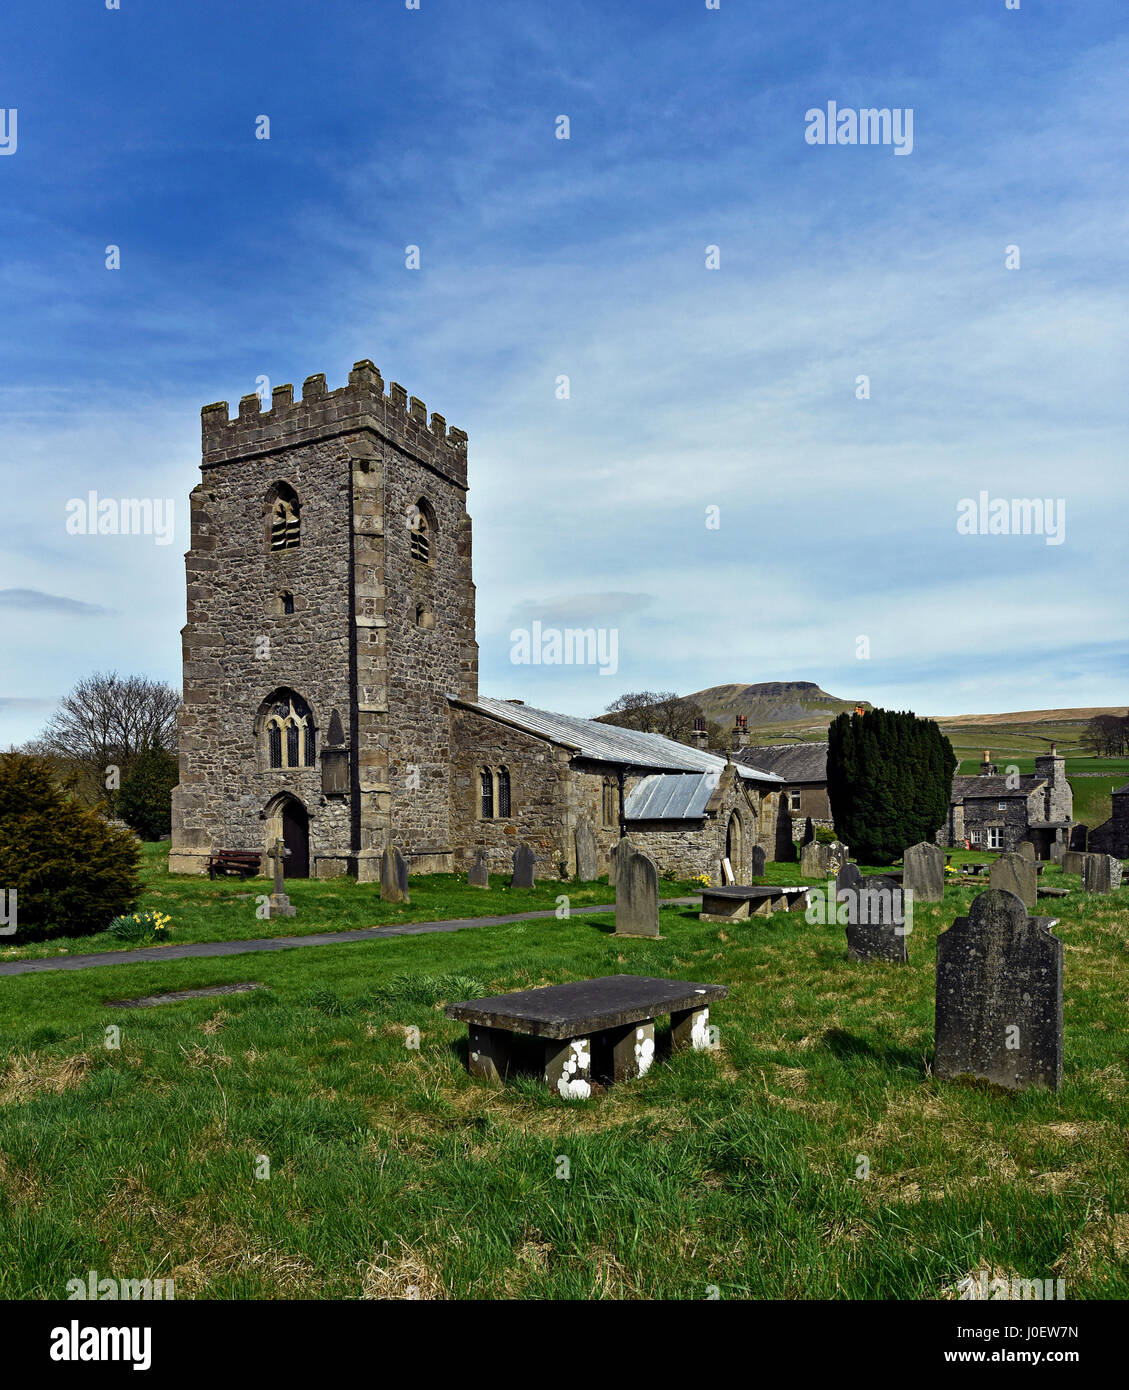 Church of Saint Oswald. Horton-in-Ribblesdale, Craven, North Yorkshire, England, United Kingdom, Europe. Stock Photo